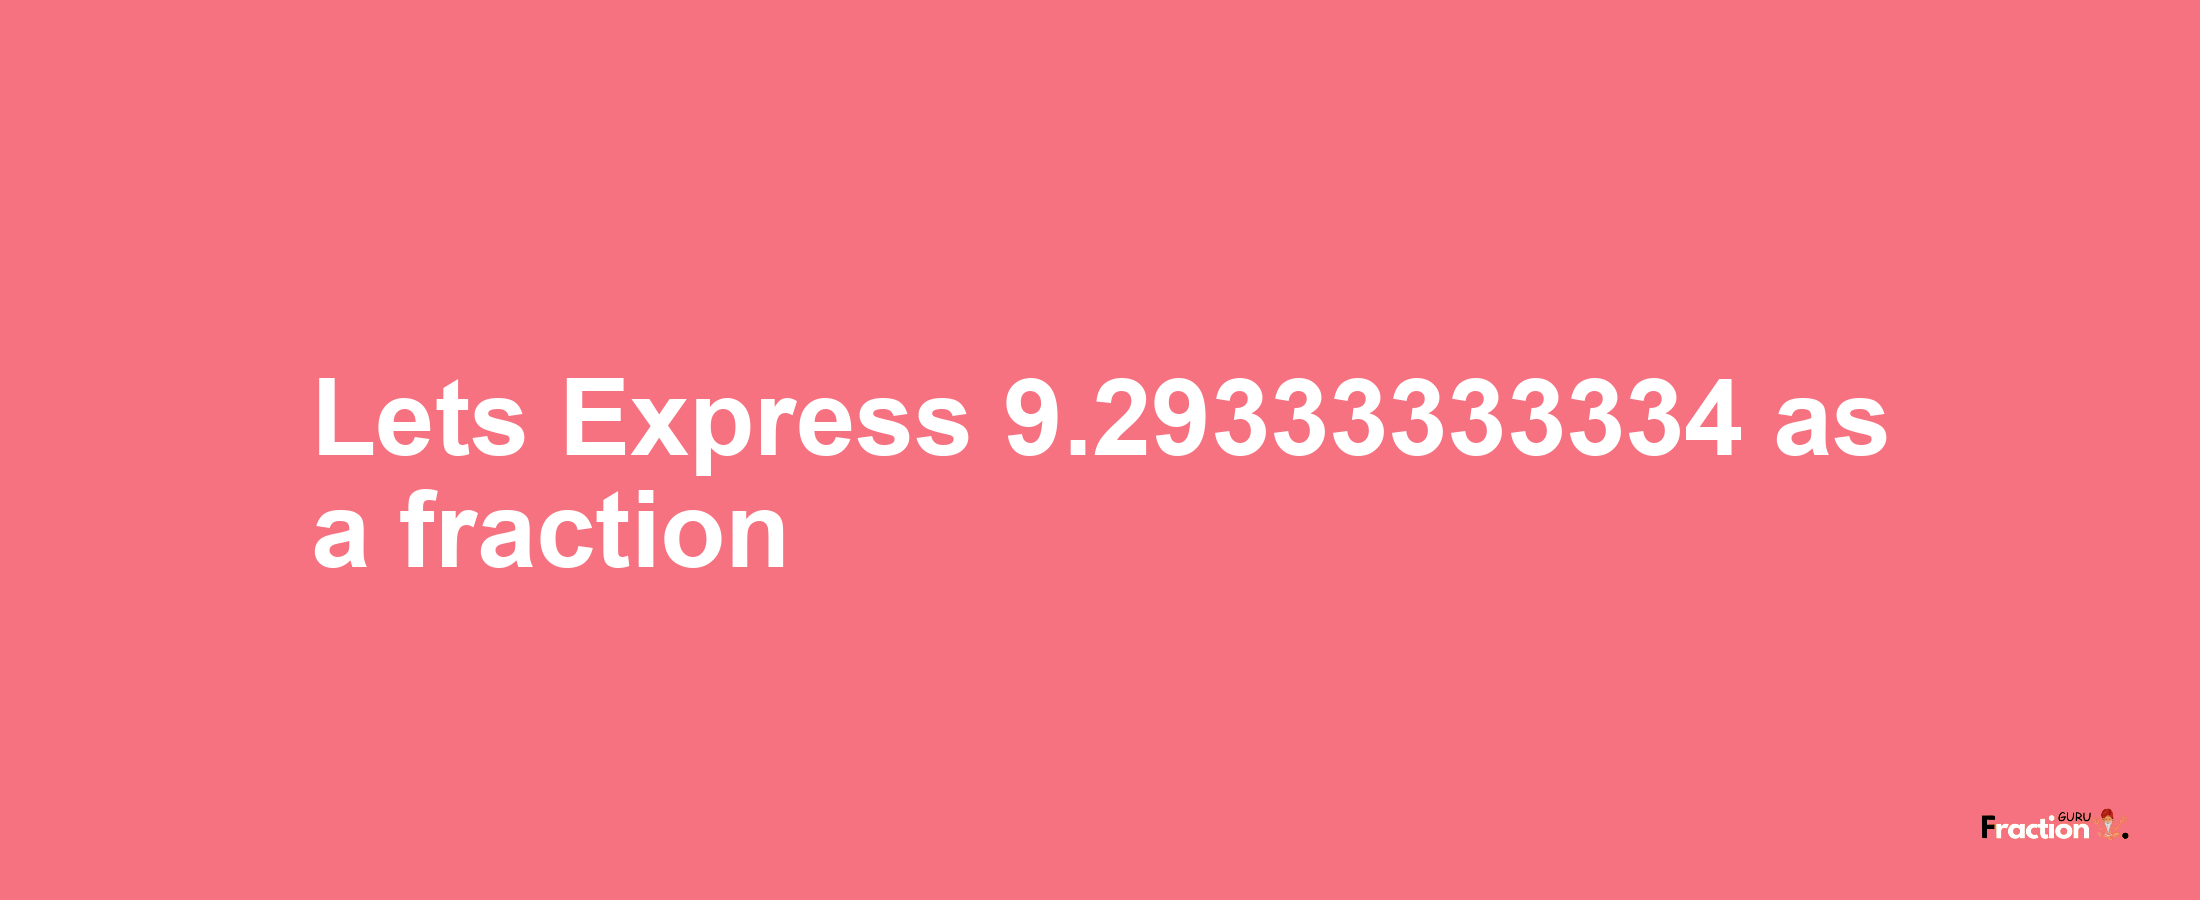 Lets Express 9.29333333334 as afraction